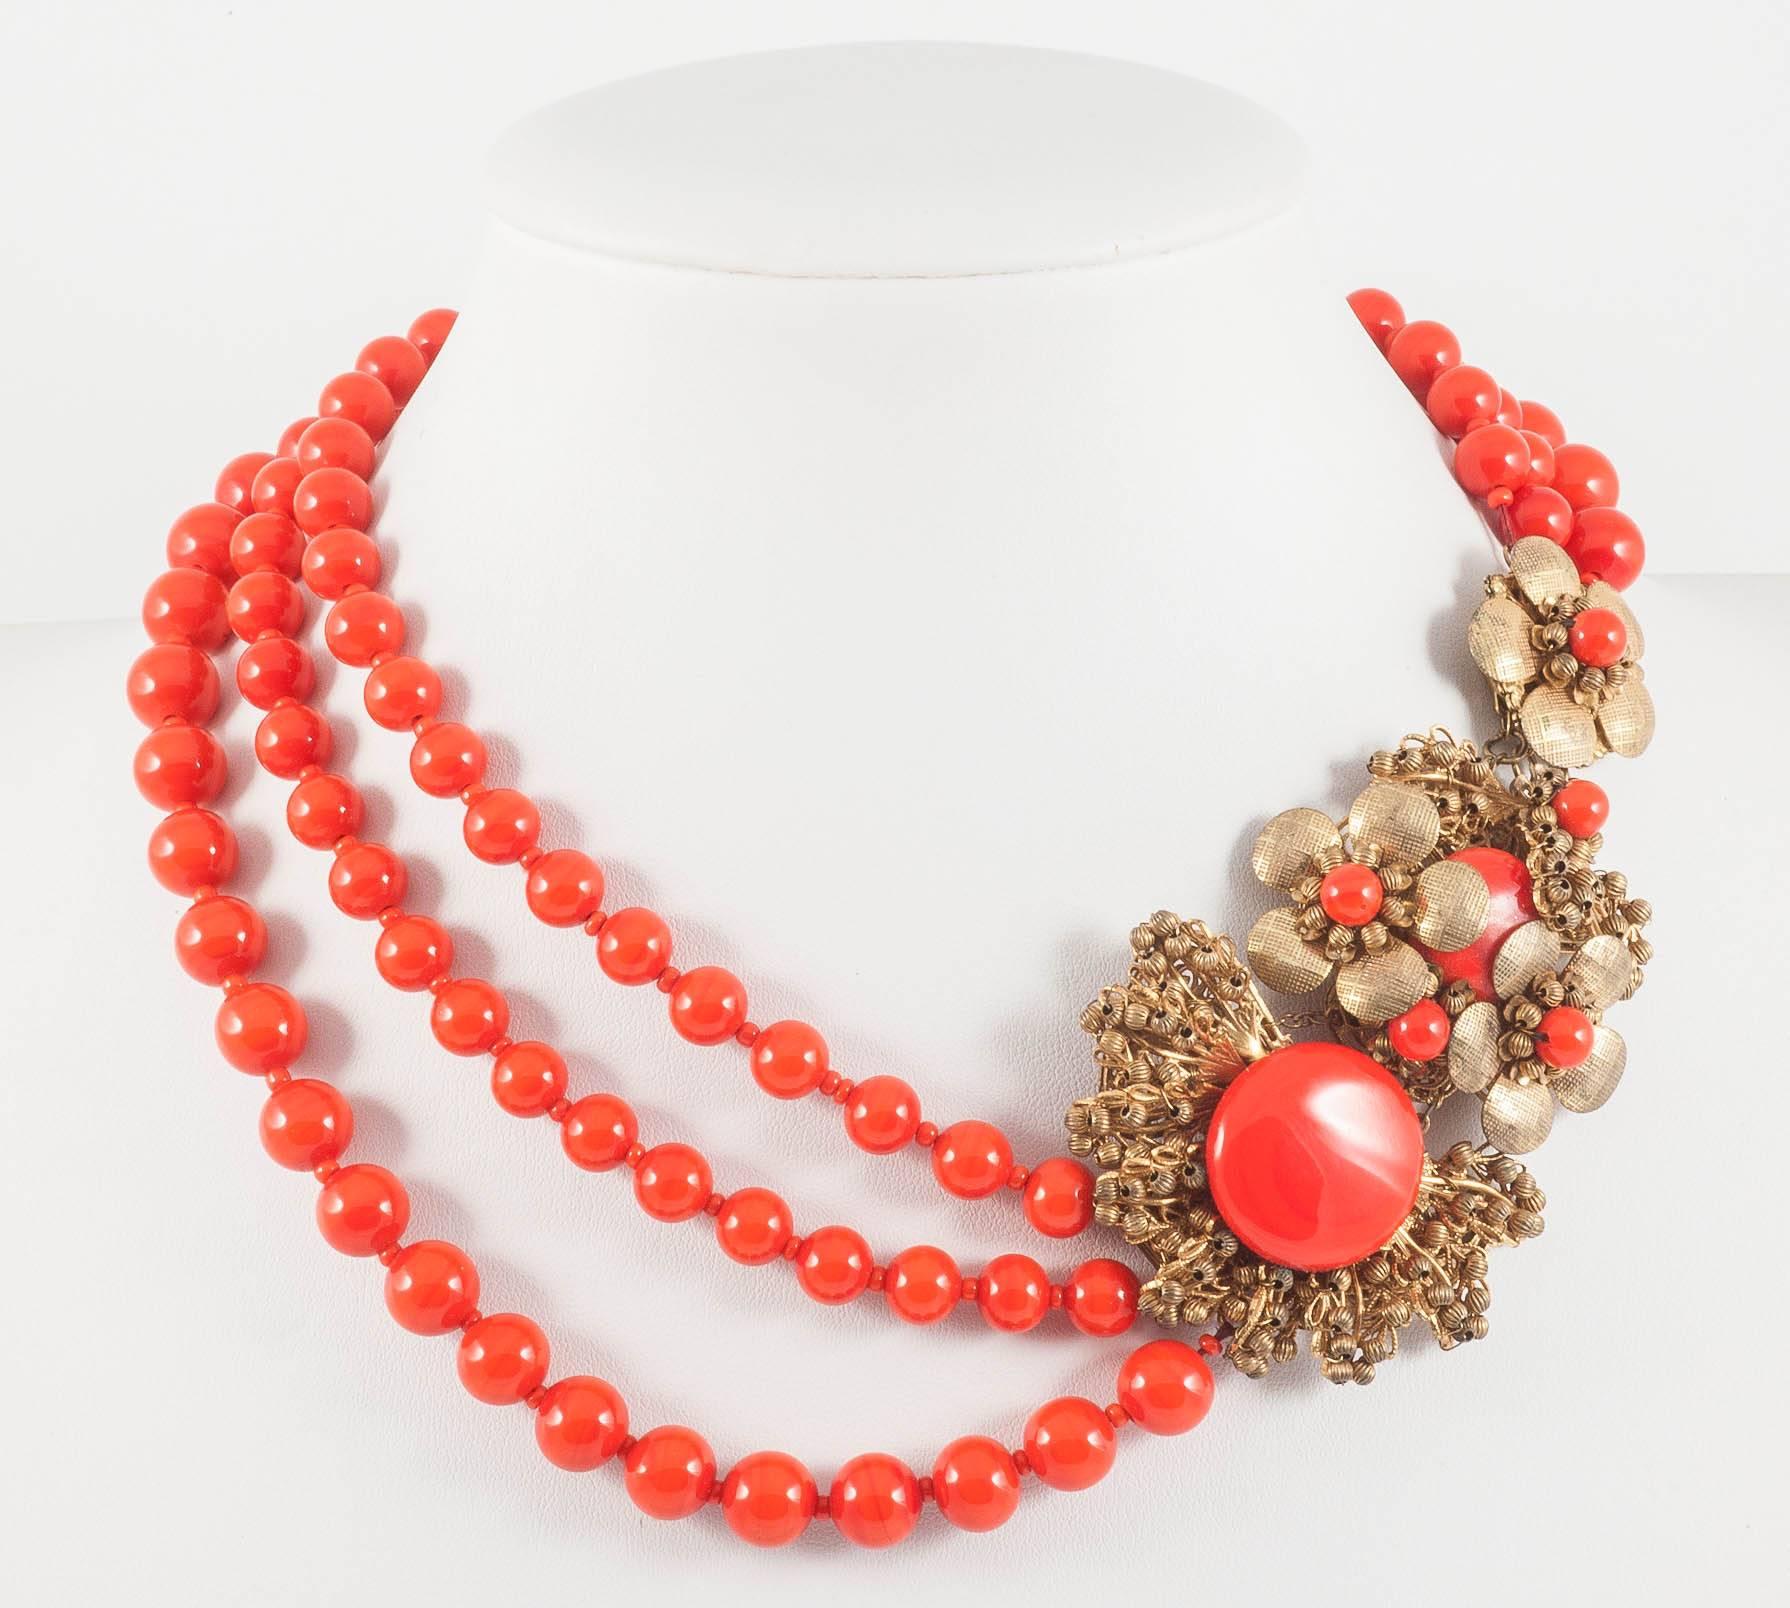 A vibrant and joyful red glass bead and button necklace, with a strikingly ornate clasp/sidepiece, designed by Robert Clark, for Miriam Haskell in the 1960s. The clasp, which is subtlely hidden, is made out of characteristic filigree gilt 'flowers',